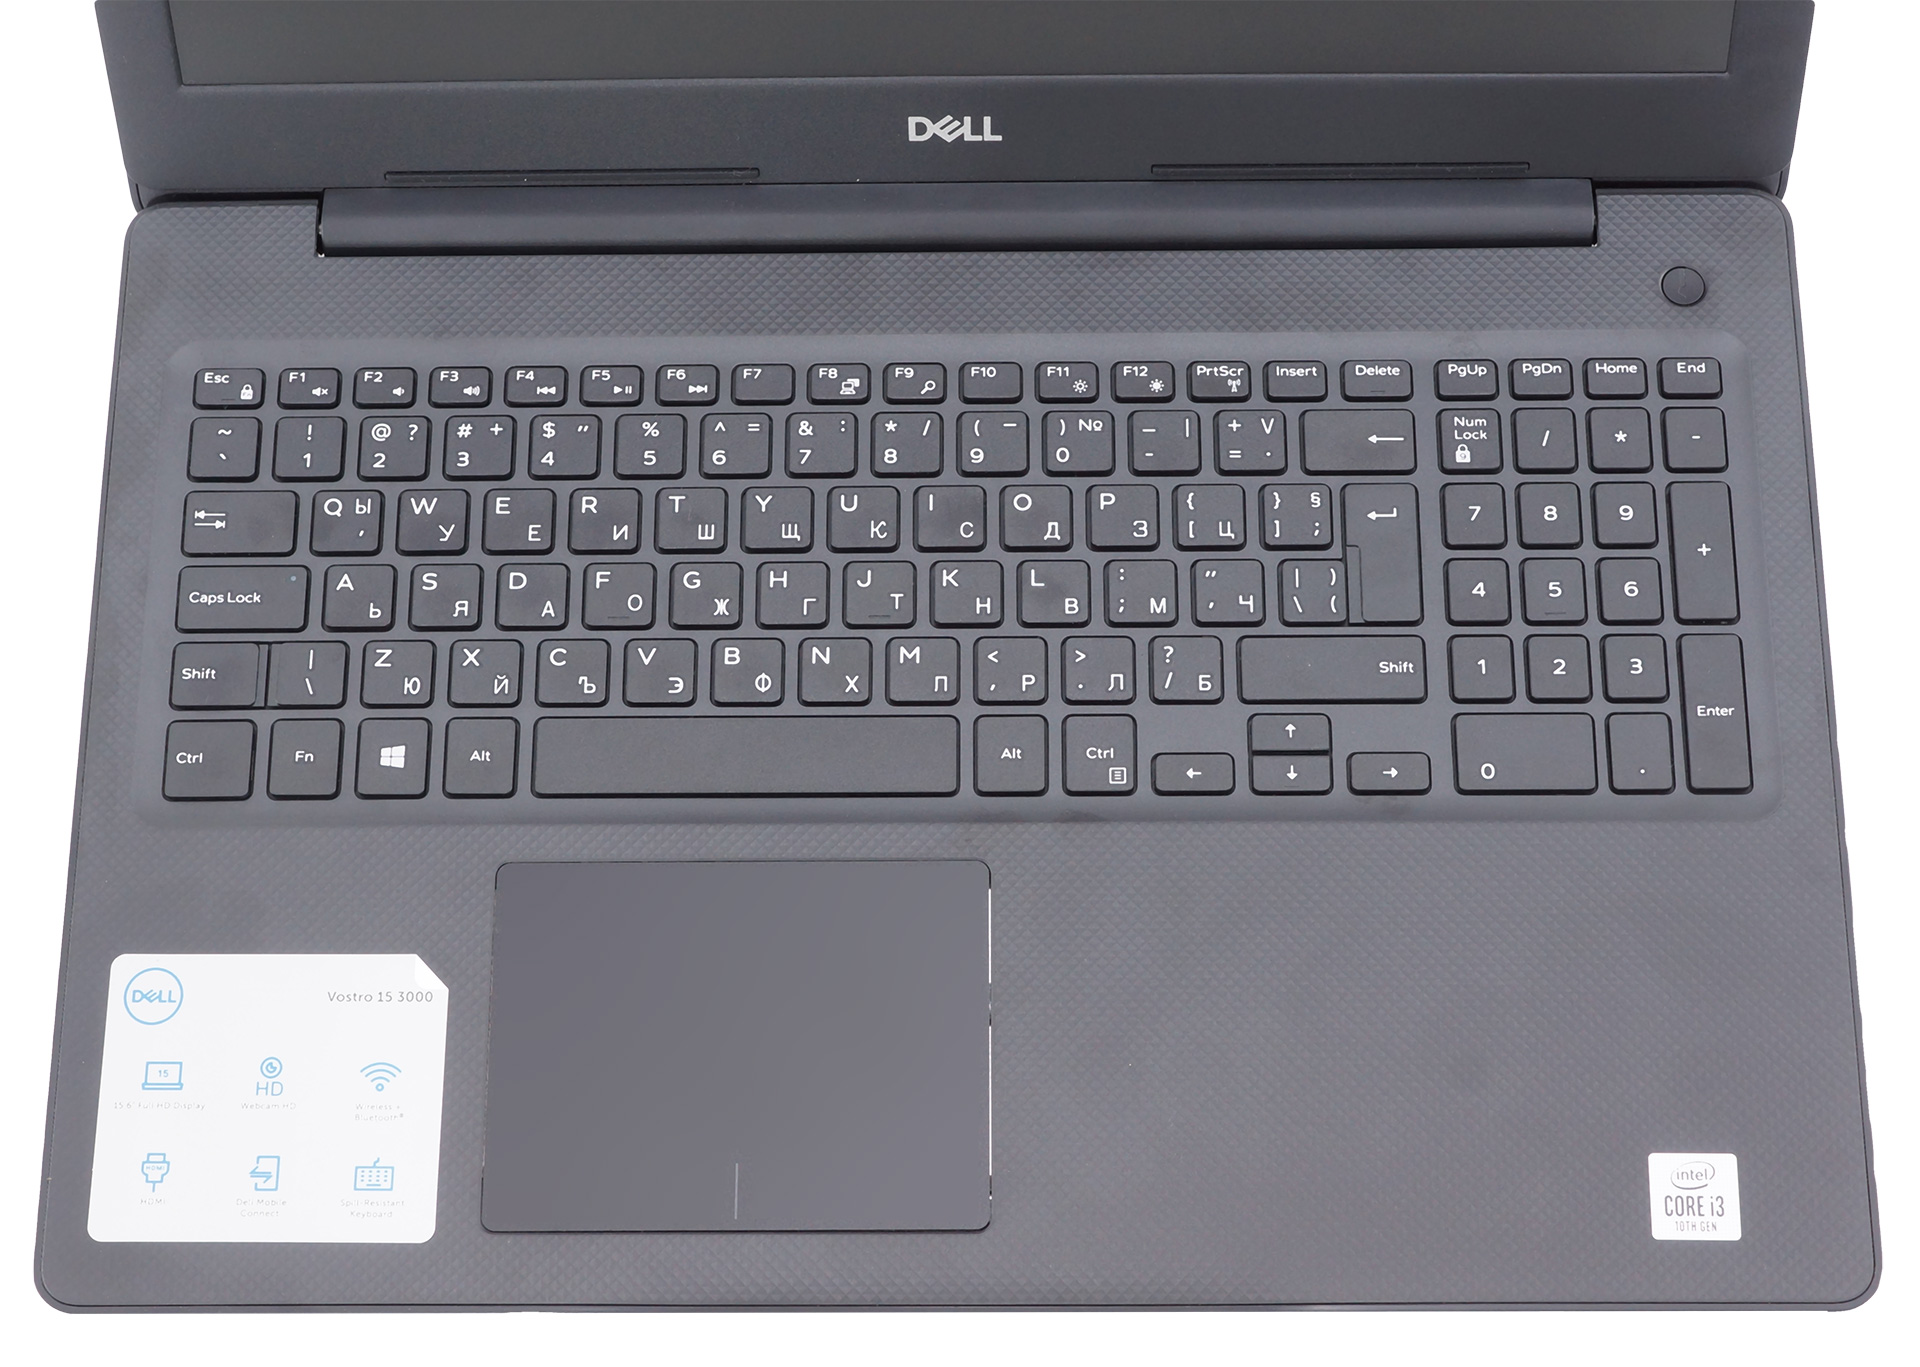 Dell Vostro 3590 review - hardware from today in a chassis from 